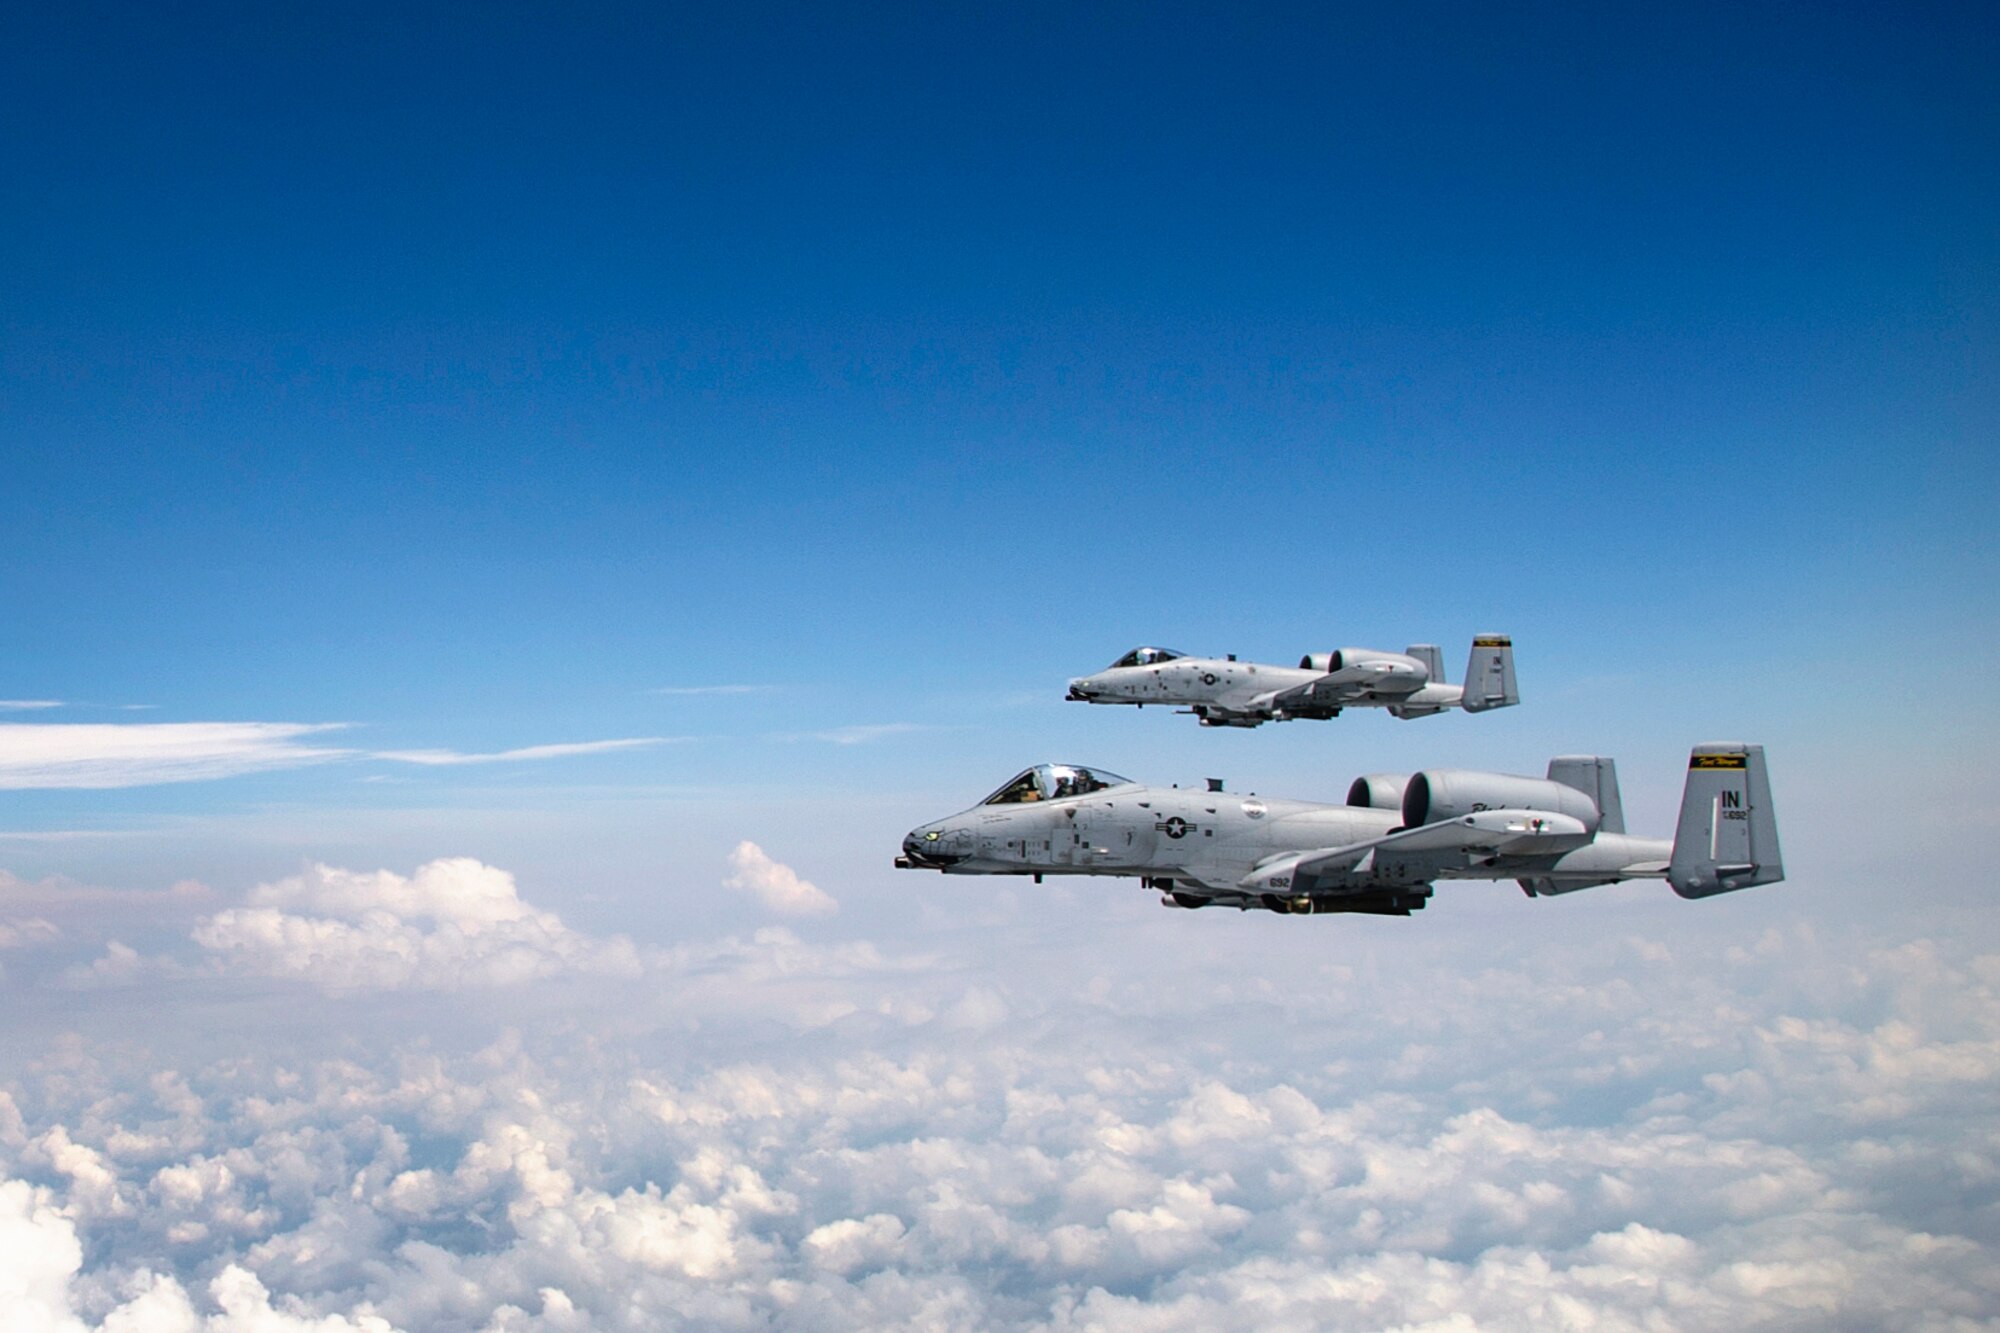 Two A-10 Warthogs from the 122nd Fighter Wing, Fort Wayne, Ind., form up parallel to a KC-135R Stratotanker during an Indiana Employer Support of the Guard and Reserve event at Grissom Air Reserve Base, Ind., Aug. 19, 2016. More than 40 people, nominated by Guard and Reserve members from the 434th ARW, the 122th Fighter Wing in Fort Wayne, Ind., and the 181st Intelligence Wing in Terre Haute Ind., had a hand-on tour of the base that concluded with an air refueling mission. (U.S. Air Force photo/Staff Sgt. Katrina Heikkinen)